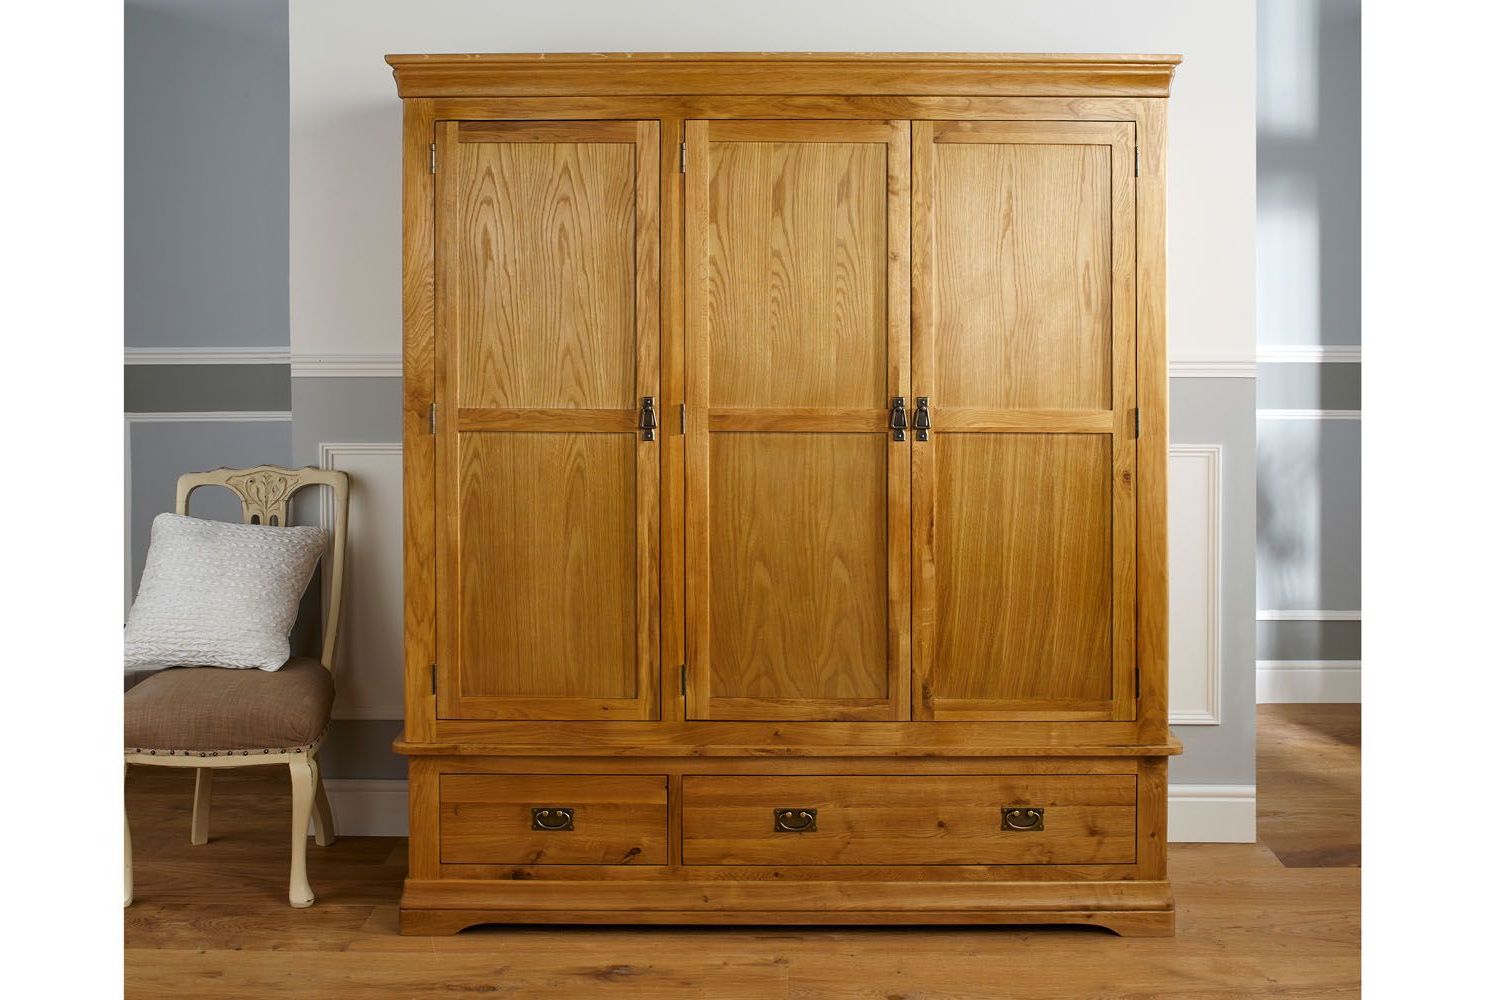 French Farmhouse Large Triple Oak Wardrobe – Free Delivery | Top Furniture With Large Oak Wardrobes (View 4 of 20)